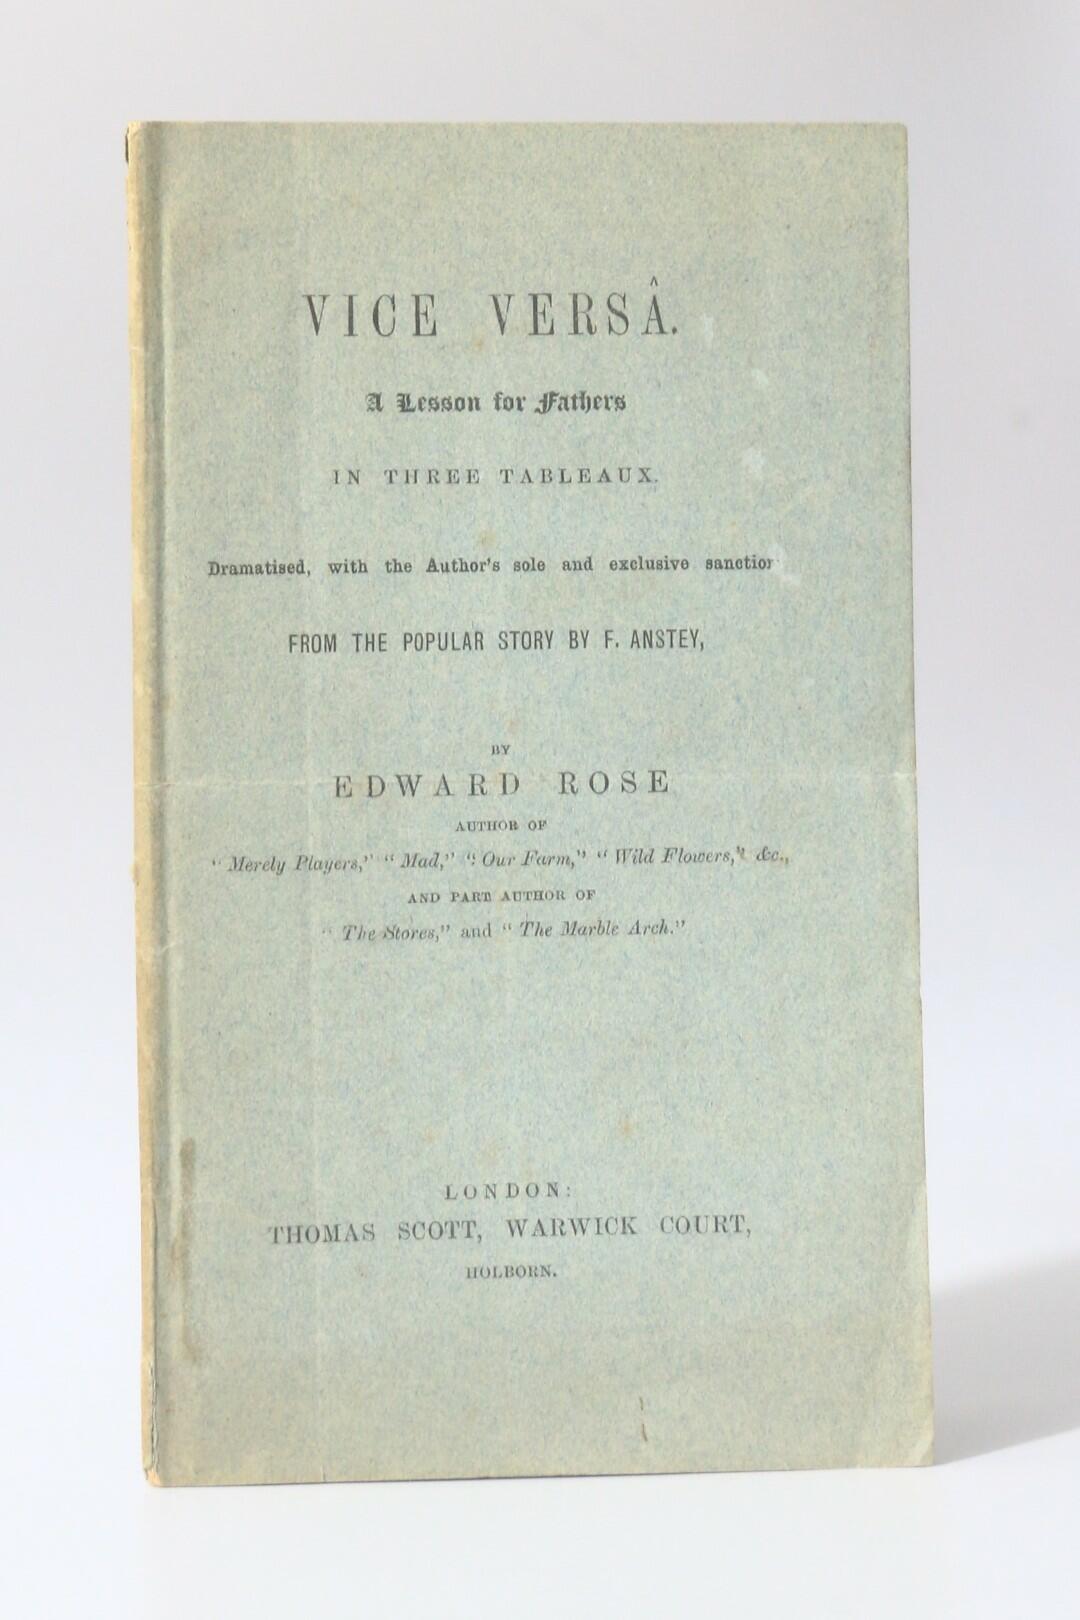 F. Anstey [adapted by Edward Rose] - Vice Versa: A Lesson for Fathers in Three Tableaux - Thomas Scott, n.d. [1883], Signed First Edition.